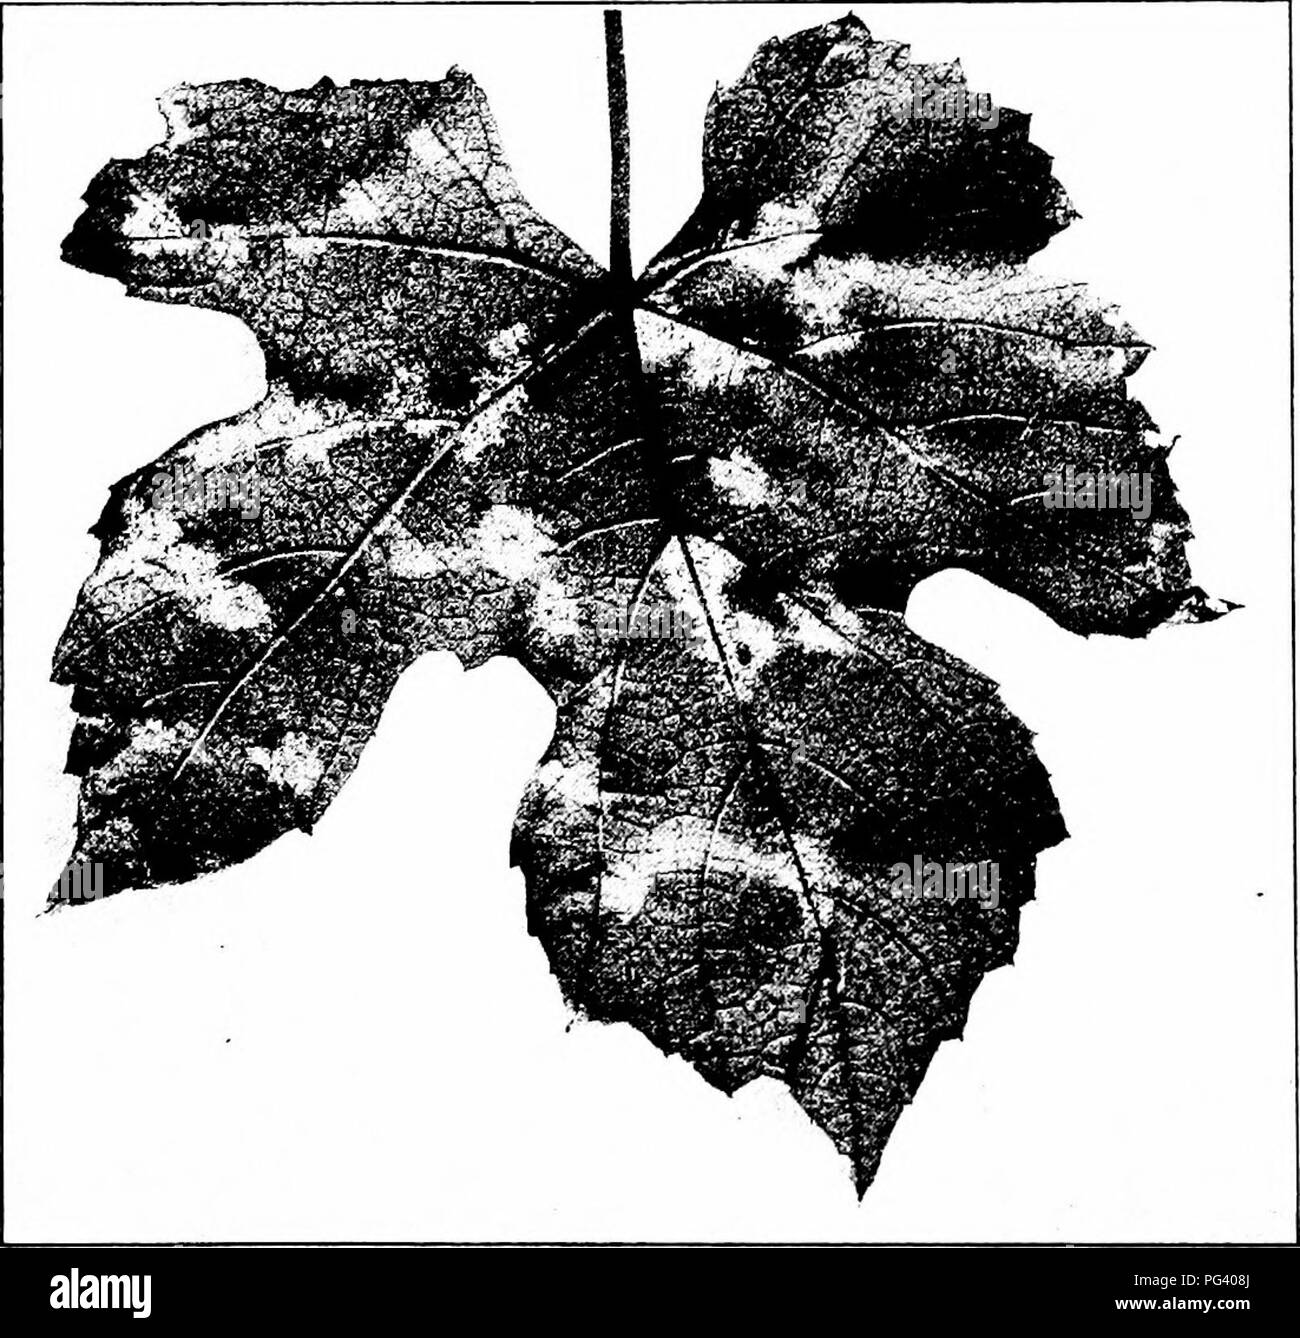 . Manual of fruit diseases . Fruit. 238 MANUAL OF FRUIT DISEASES Symptoms. On the upper surface of the leaf the first signs of downy-mildew are in the form of small greenish yellow indefinite spots, the margins of which gradually merge into the darker green of. Fig. 61. — Downy-mildew on lower surface of grape-leaf. the leaf. In a short time there appears within the spot a net- work of small, reddish brown lines, the discolored smaller veins. These lines become more pronounced until the whole diseased portion is brown, dry and brittle, and eventually cracked. These symptoms apply particularly  Stock Photo